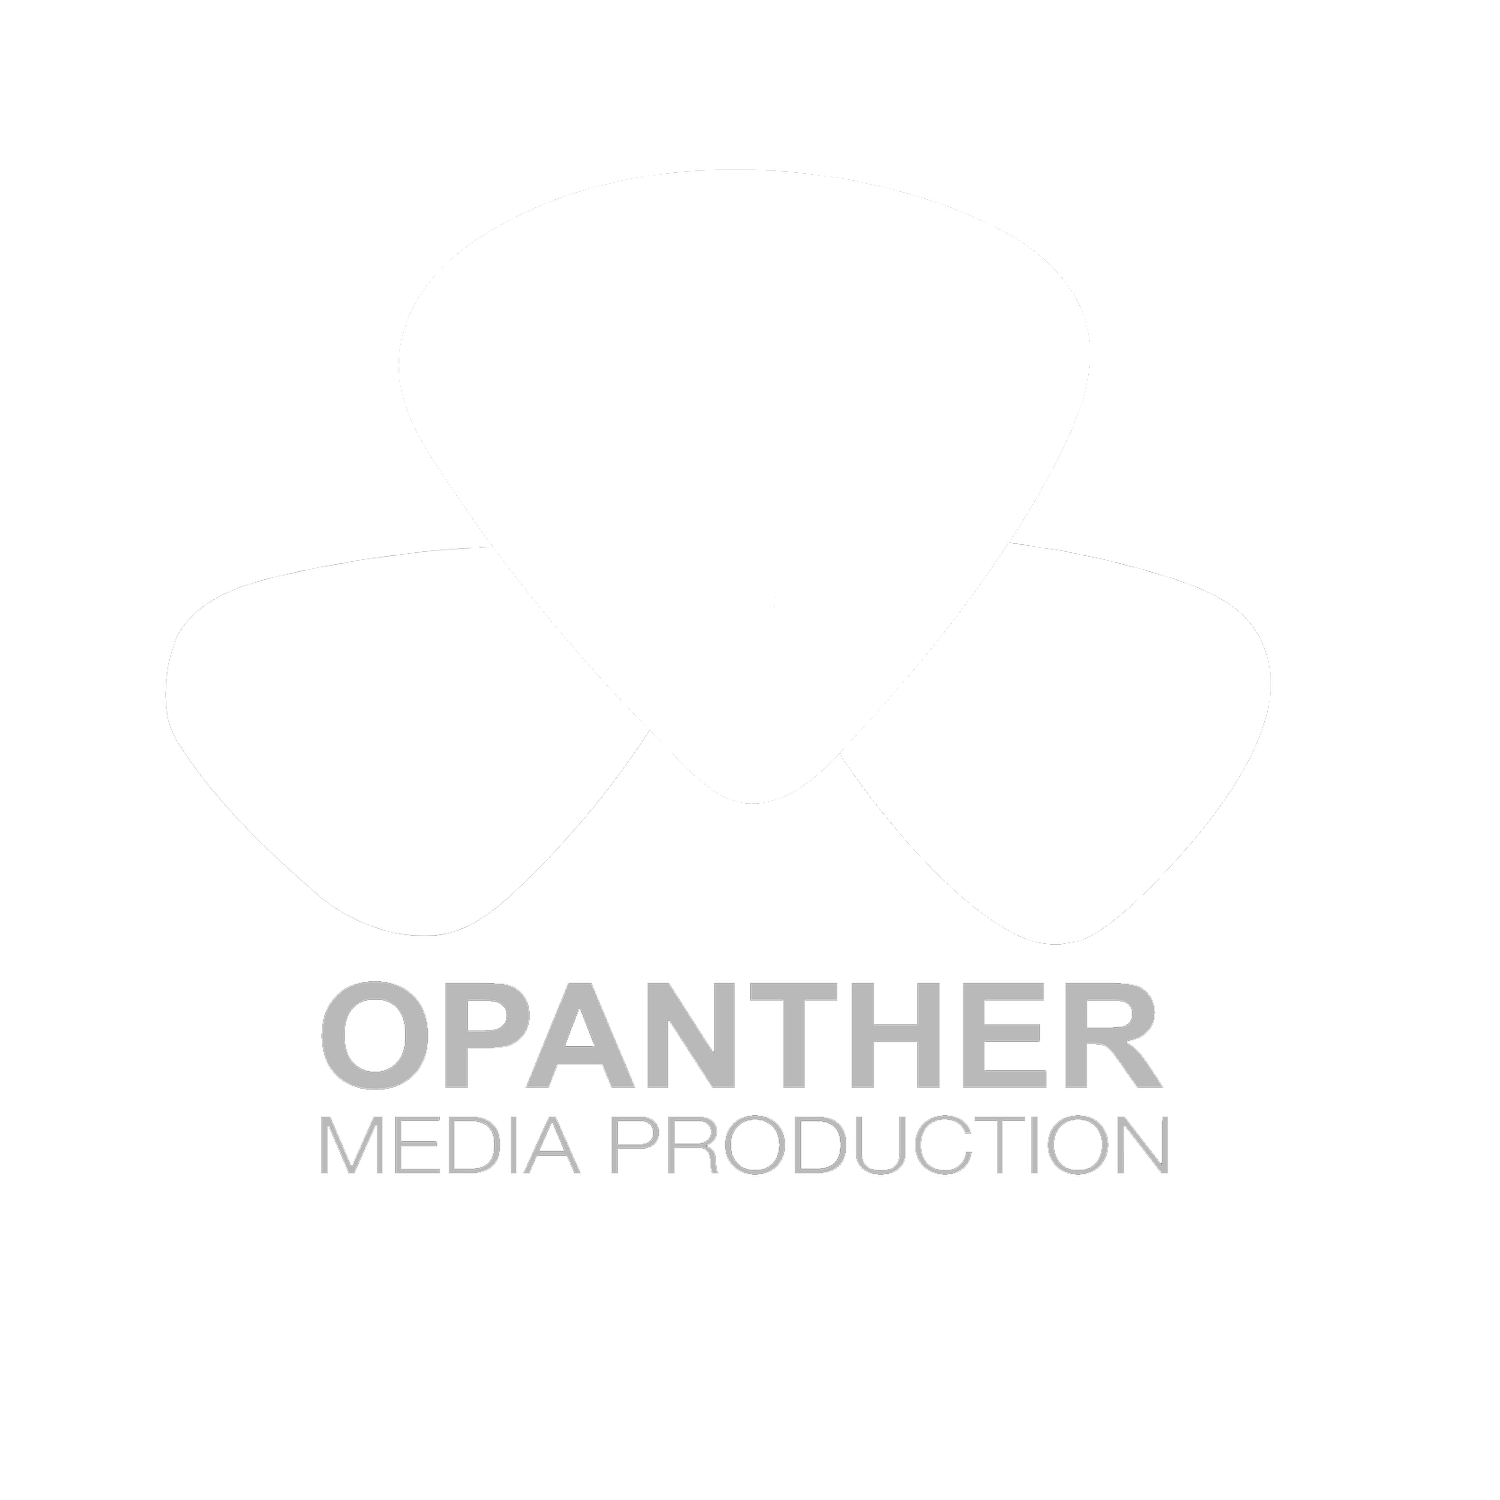 Opanther Media